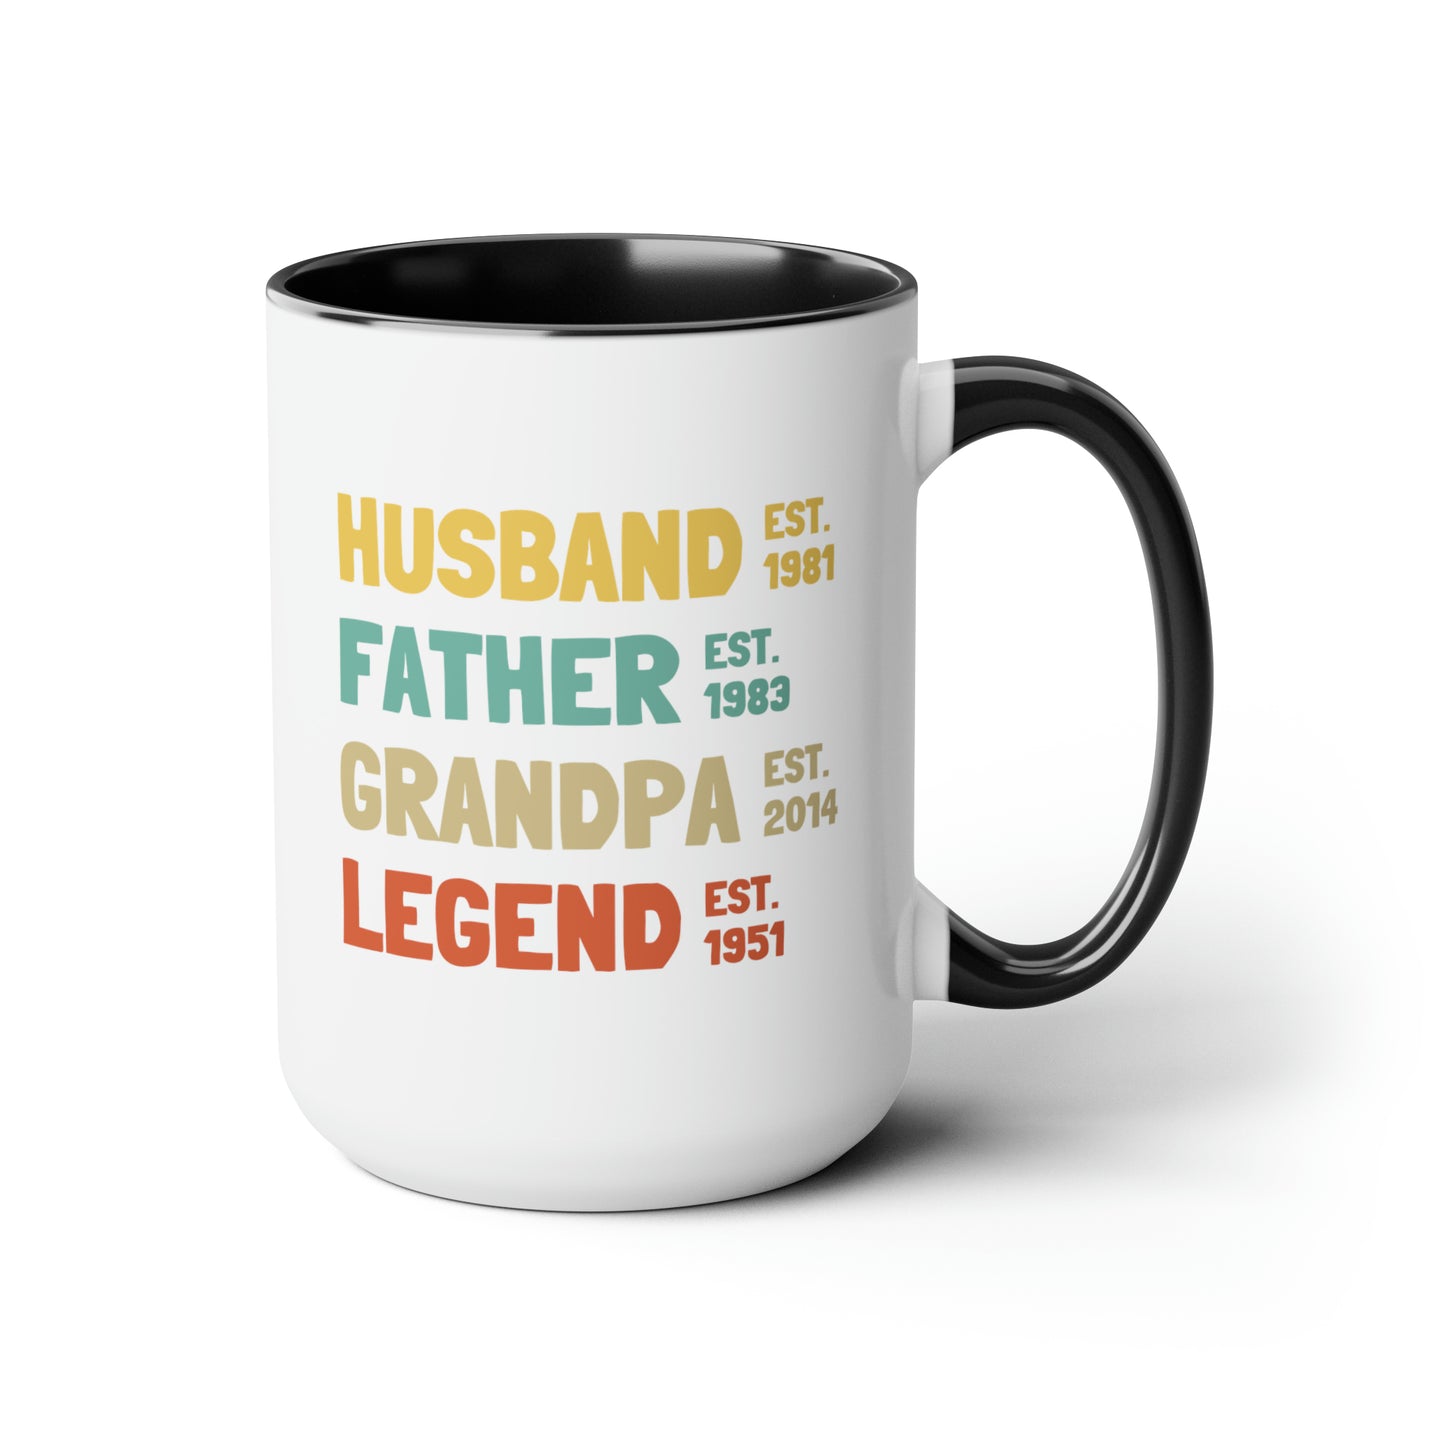 Husband Father Grandpa Legend 15oz white with black accent funny large coffee mug gift for dad fathers day birthday custom date personalize customize waveywares wavey wares wavywares wavy wares